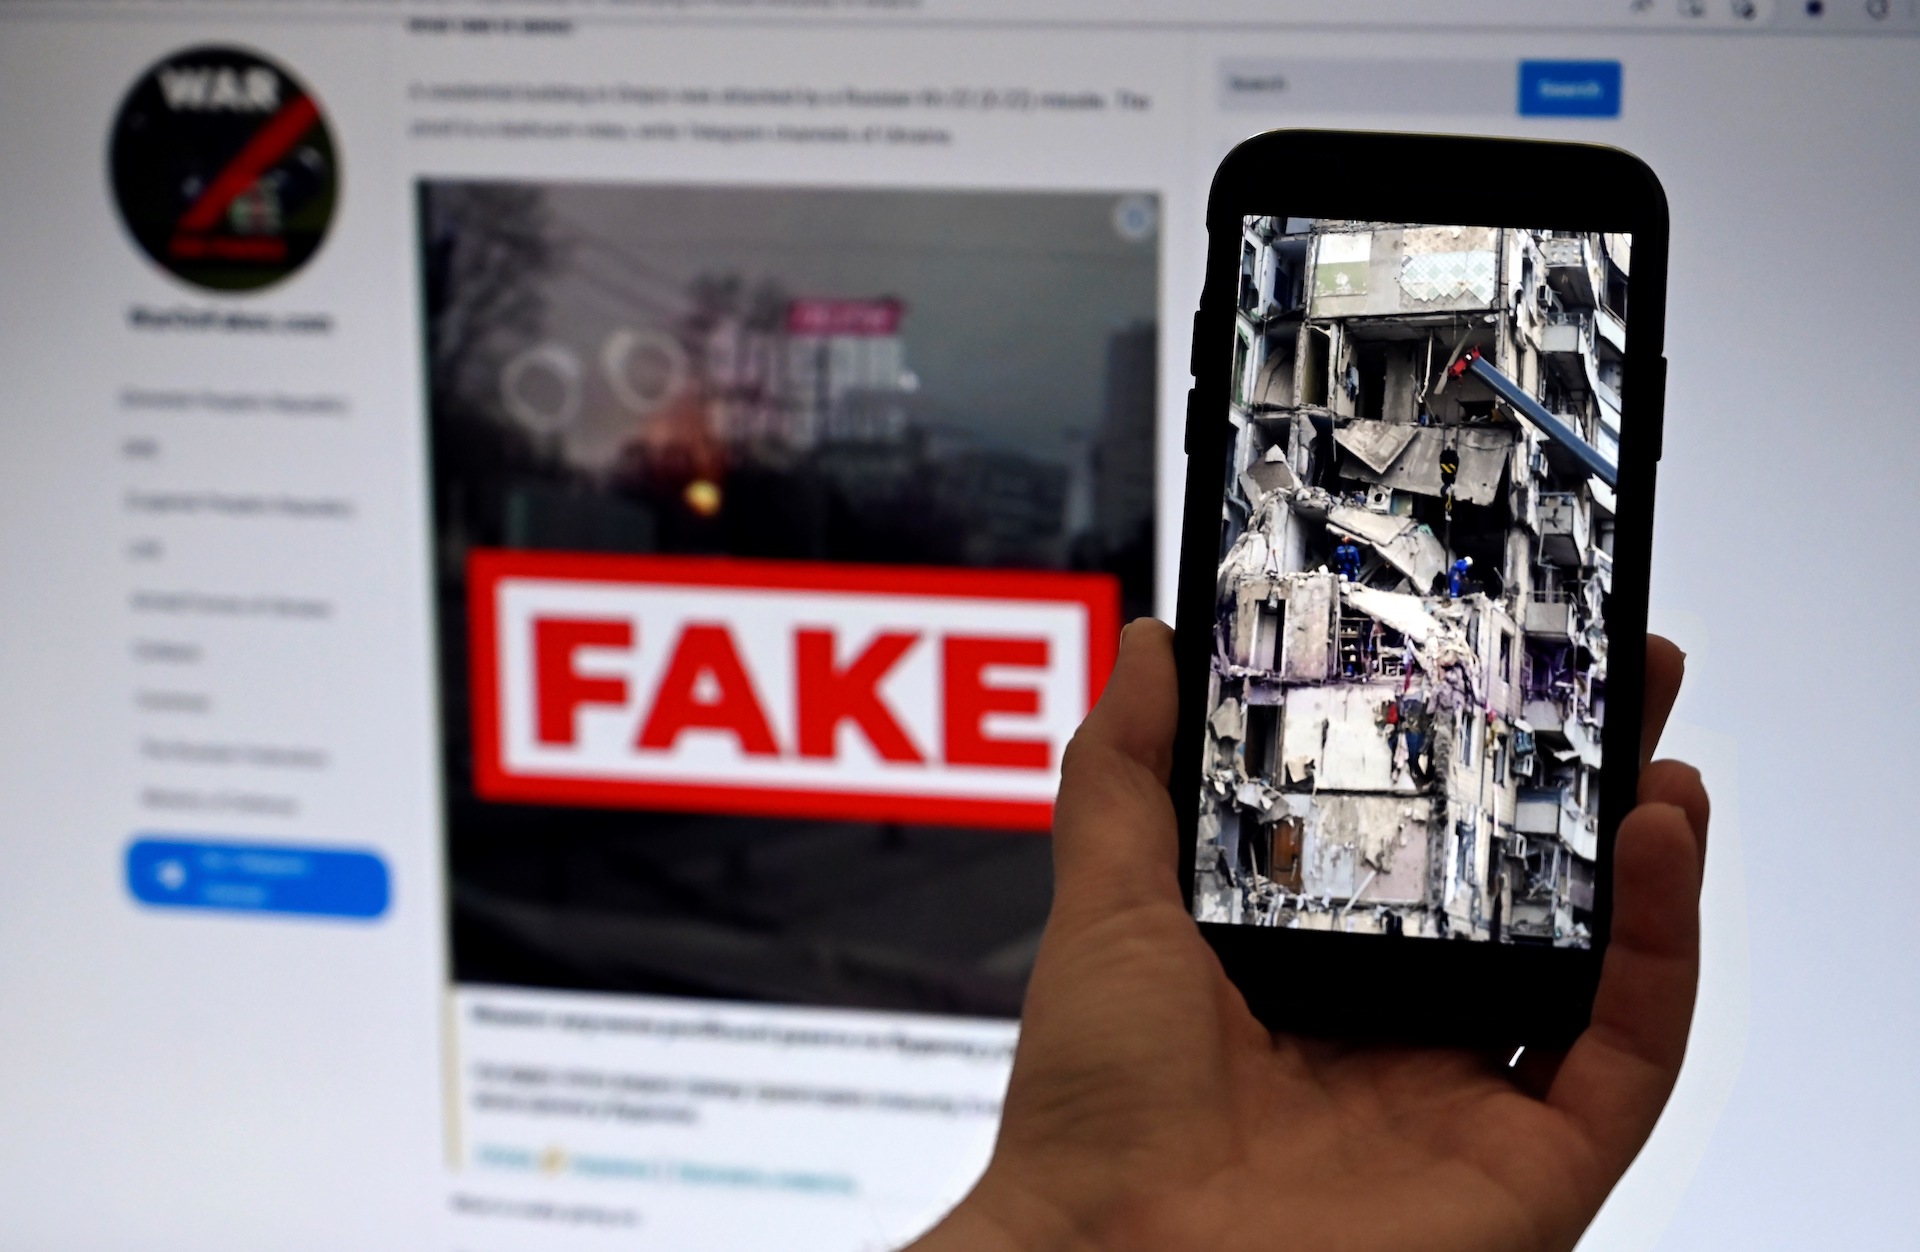 China, Russia Target Audiences with Deep Fakes